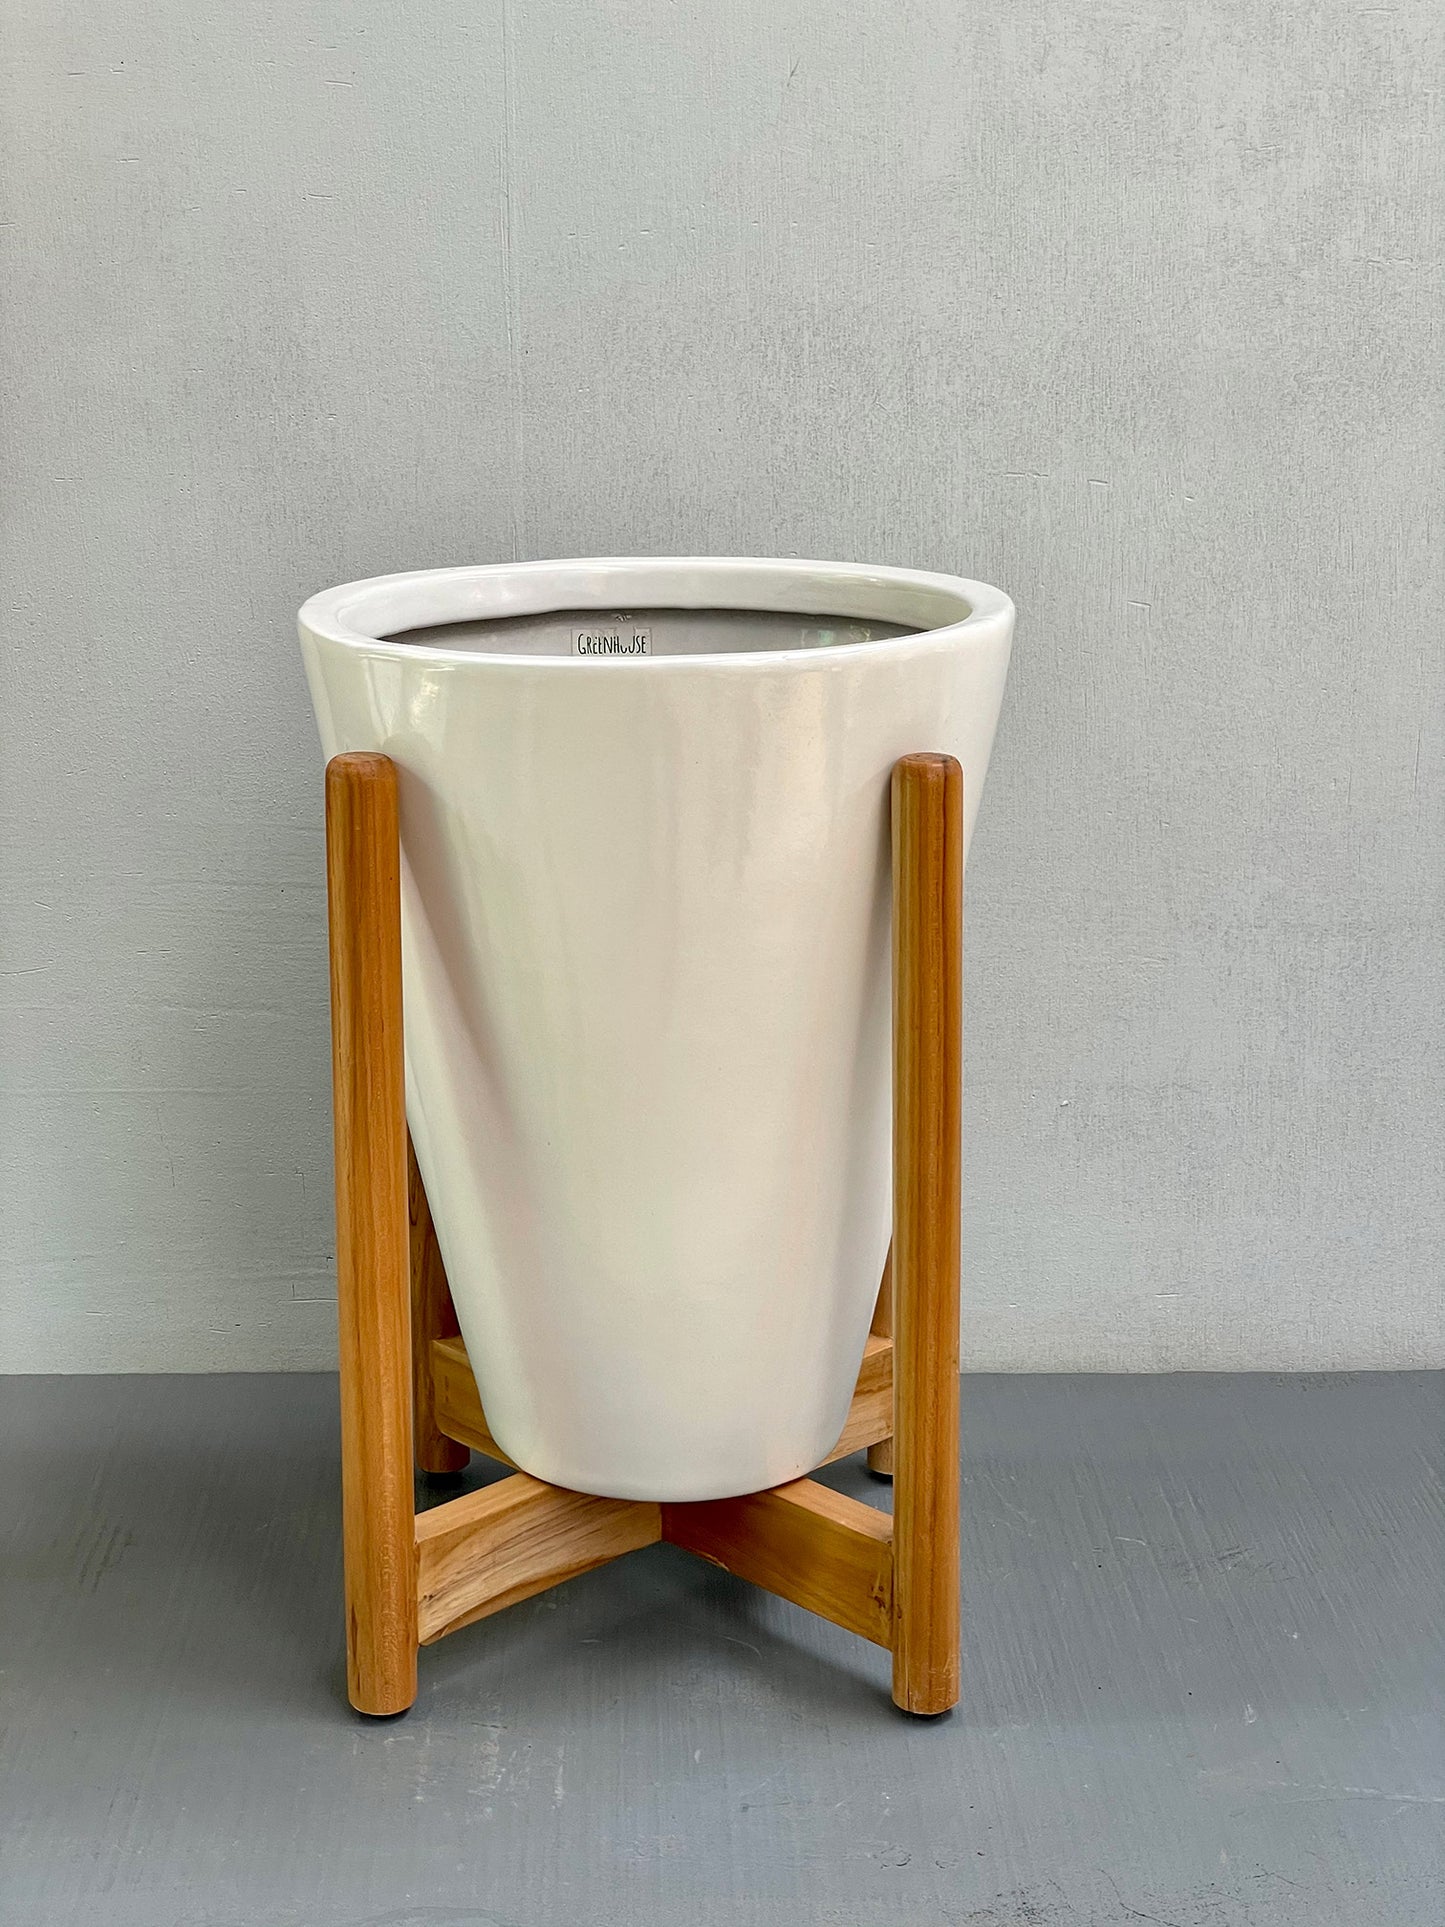 Minimalist Planter with Wooden Stand - Cone Large